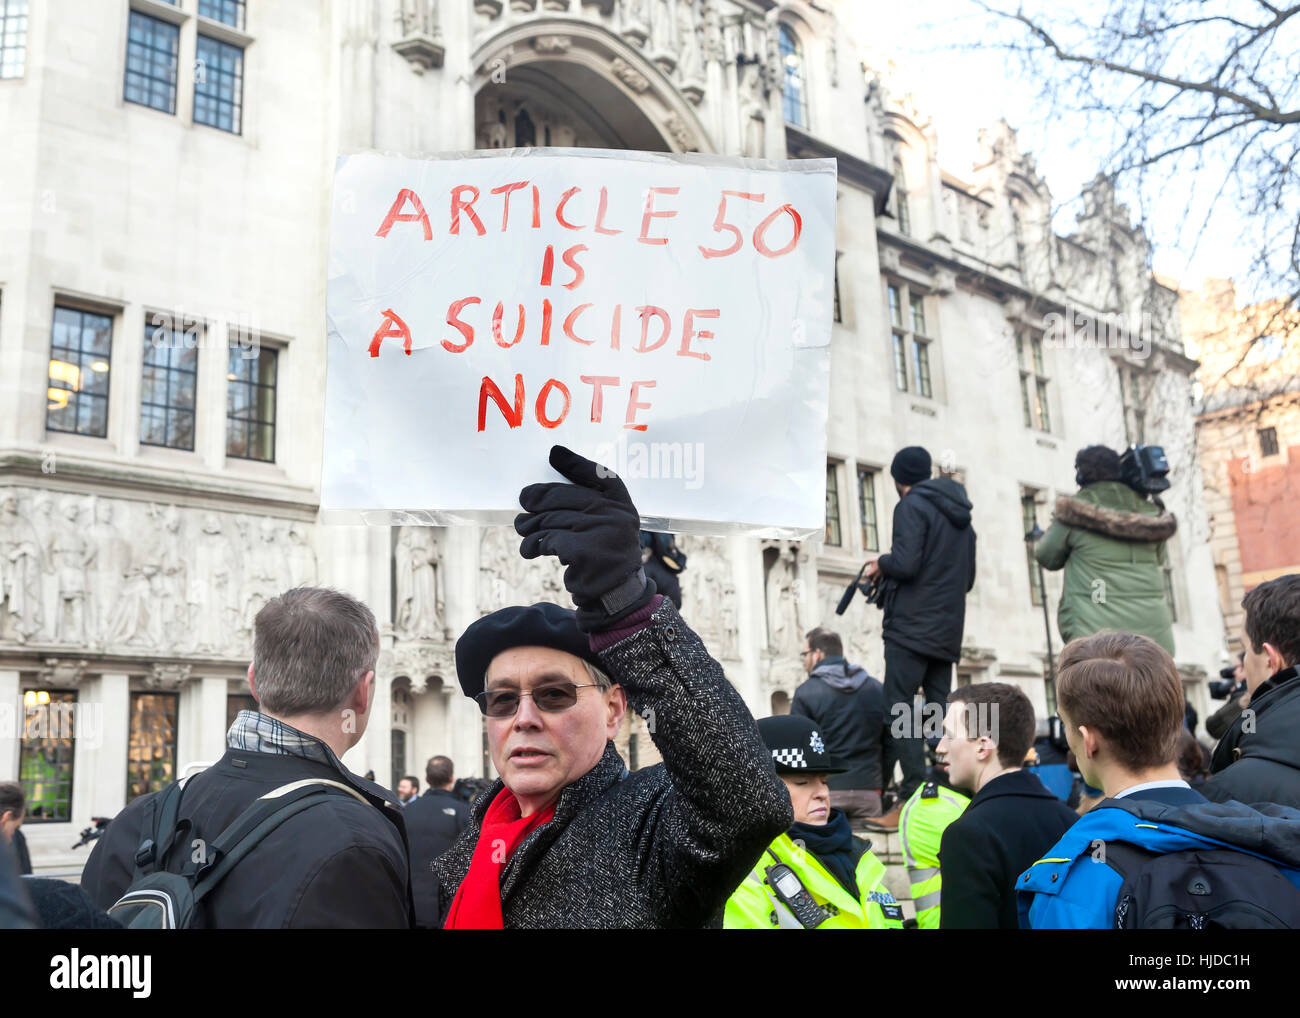 London, UK. 24th Jan, 2017. Verdict of the Supreme Court. The verdict of the Supreme Court was given today. Remain supporters were celebrating outside court. Credit: Jane Campbell/Alamy Live News Stock Photo